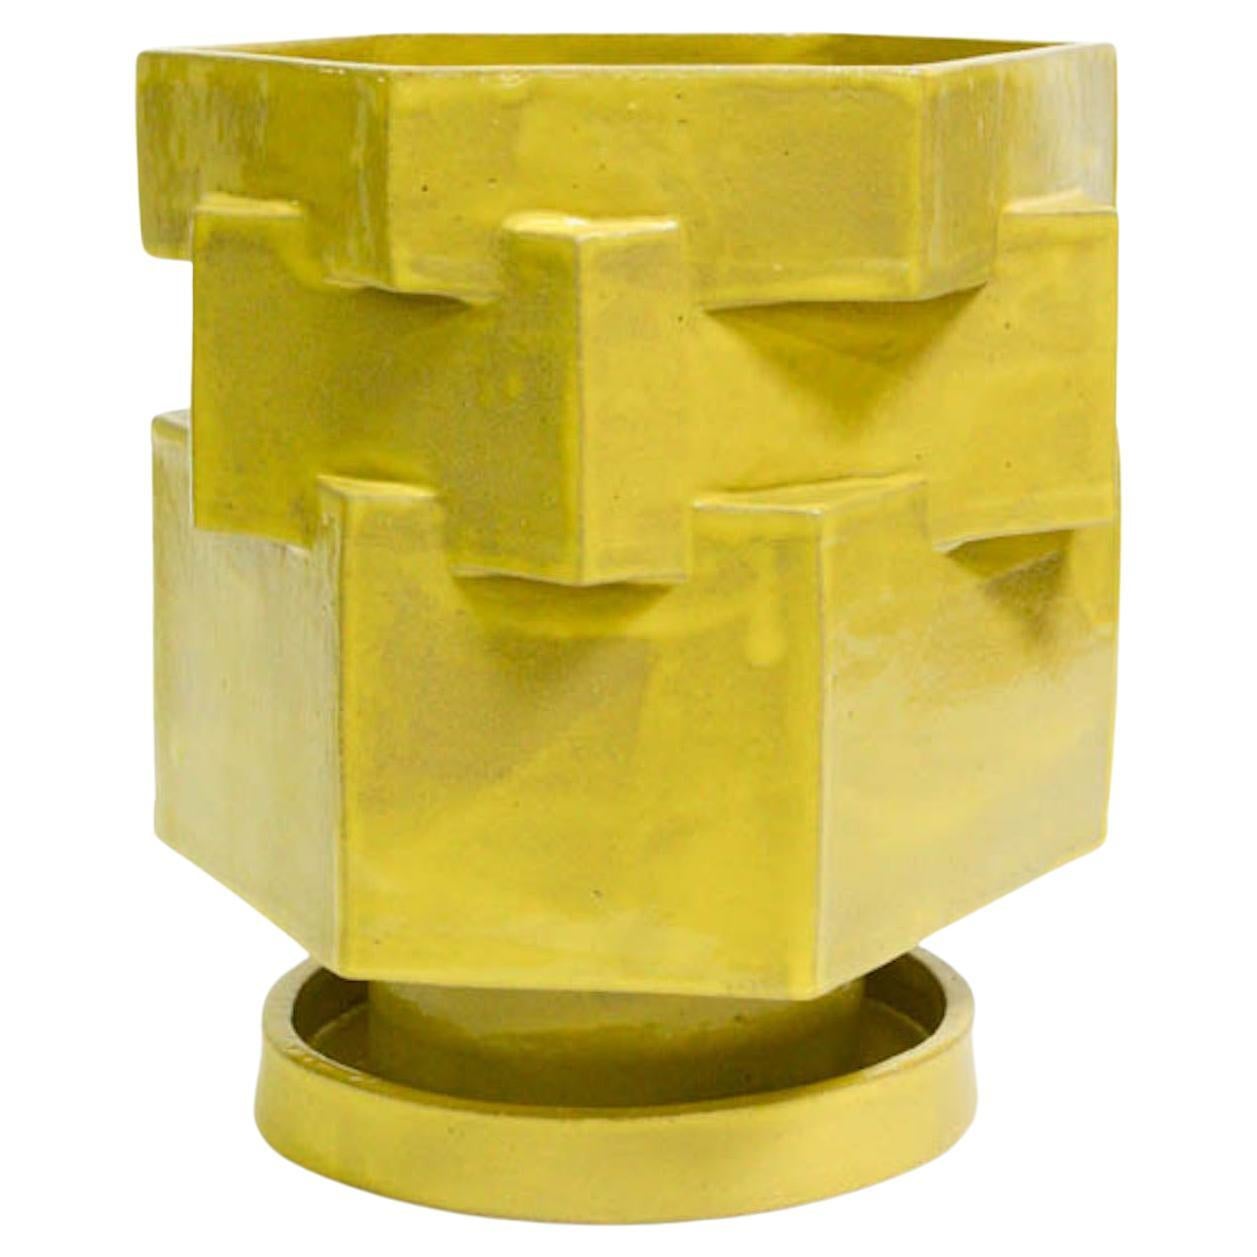 Ceramic Hex Planter in Gloss Yellow by Bzippy For Sale